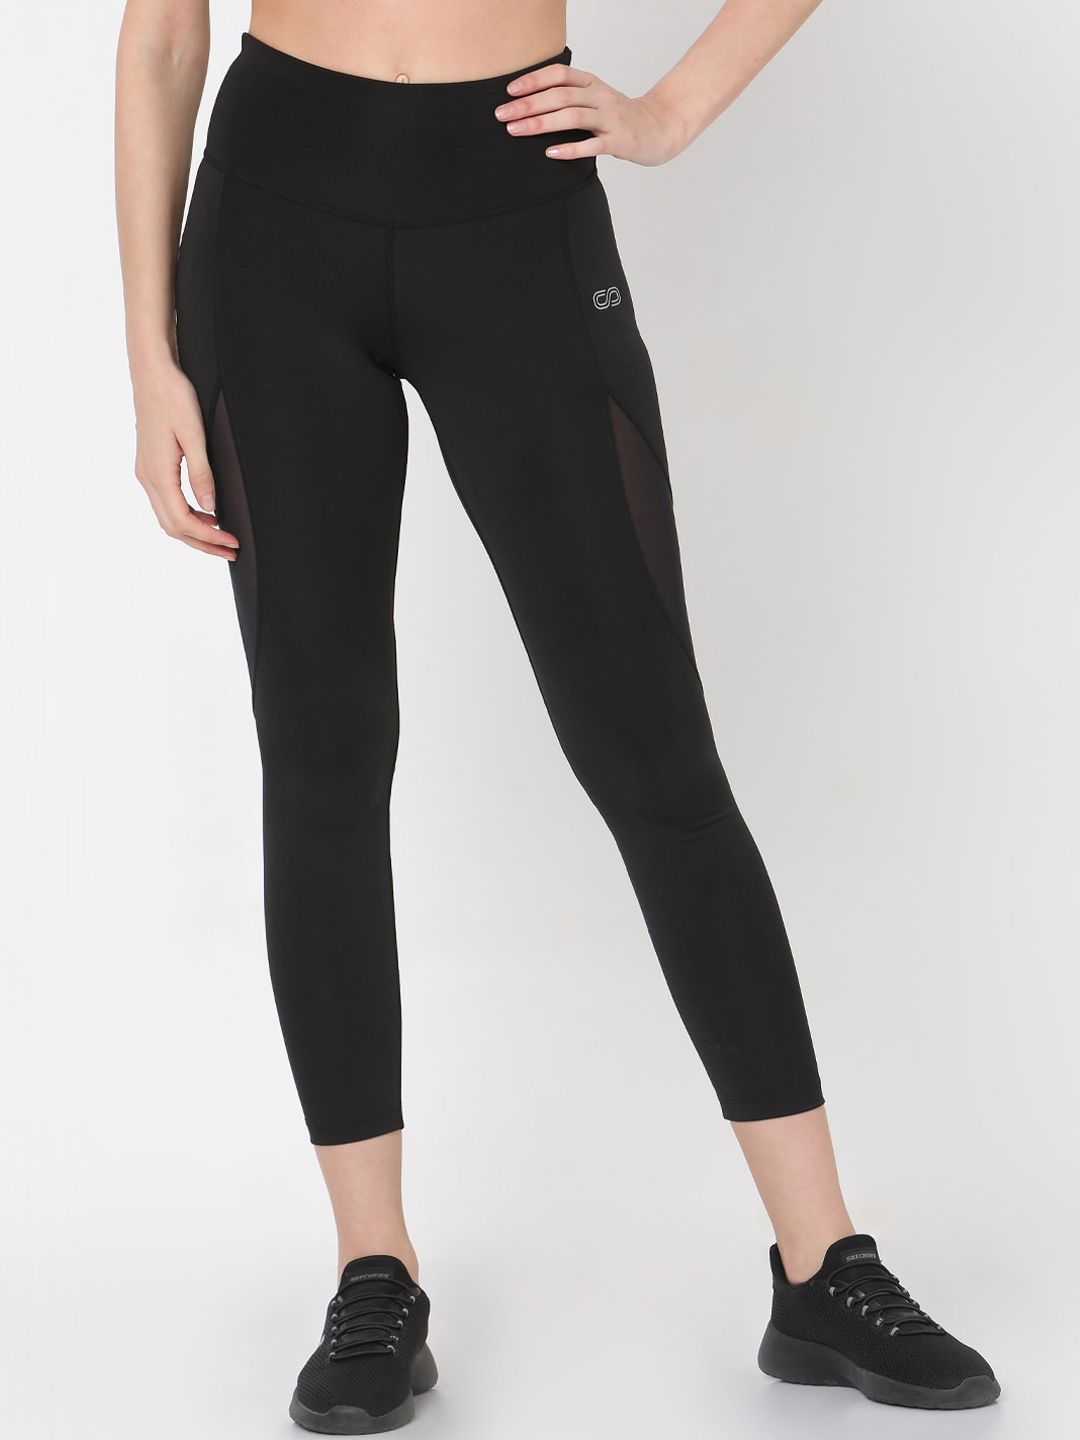 Silvertraq Women Black Solid Tights Price in India